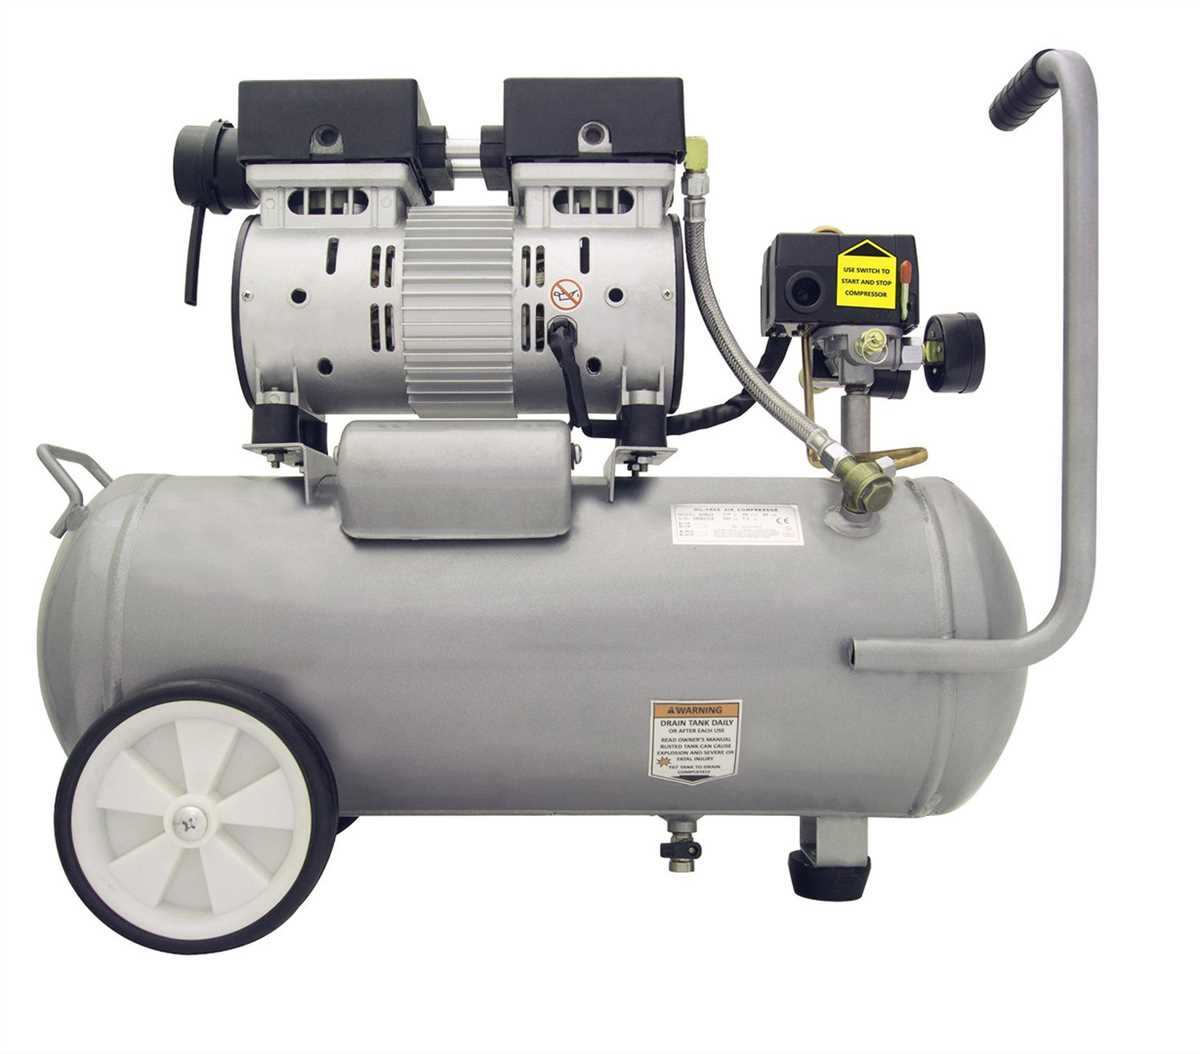 Factors to Consider When Buying an Oil Free Air Compressor